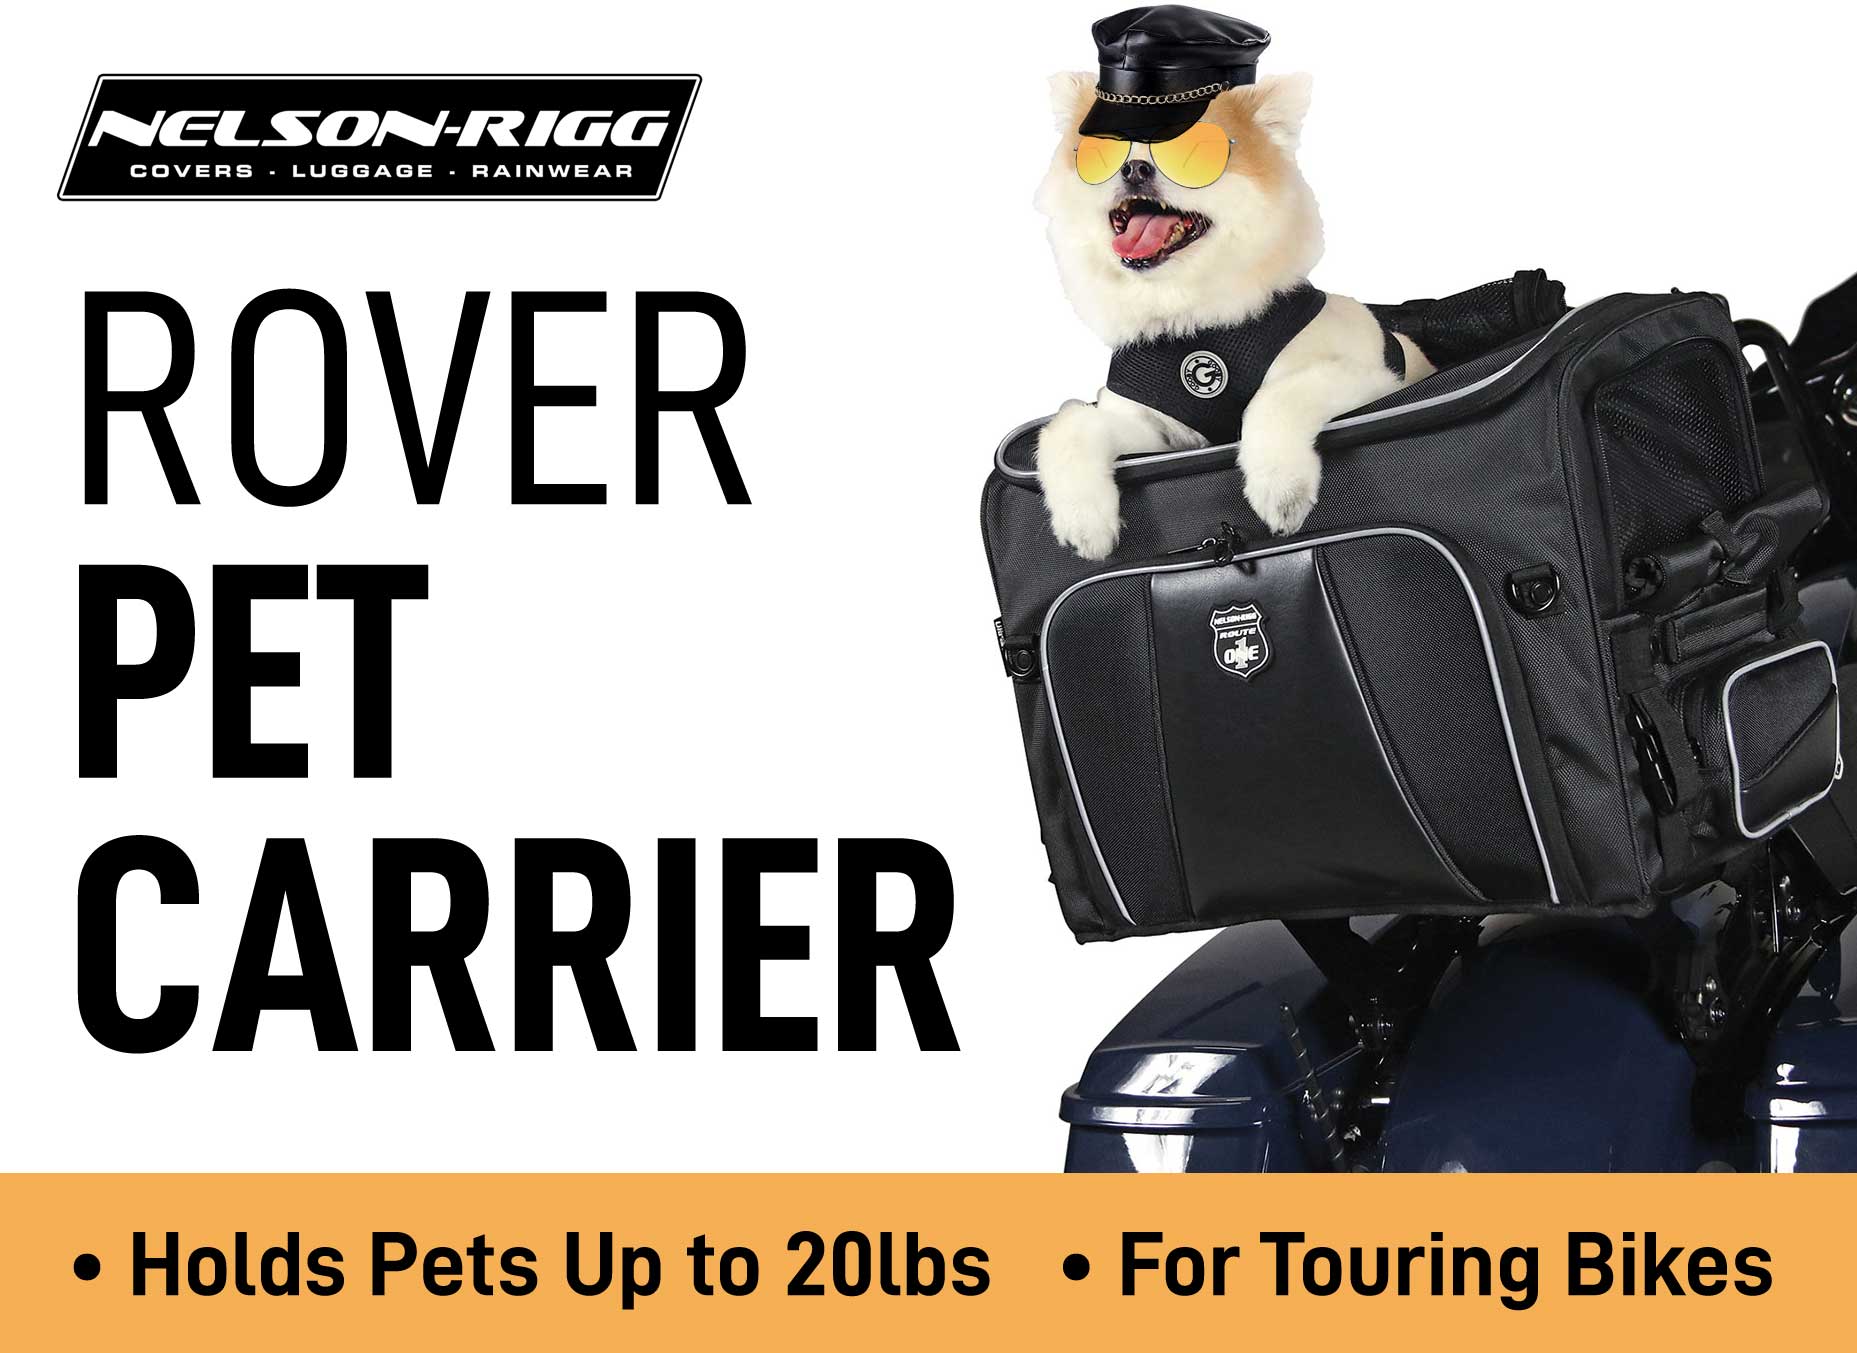 Nelson Rigg Rover Pet Carrier